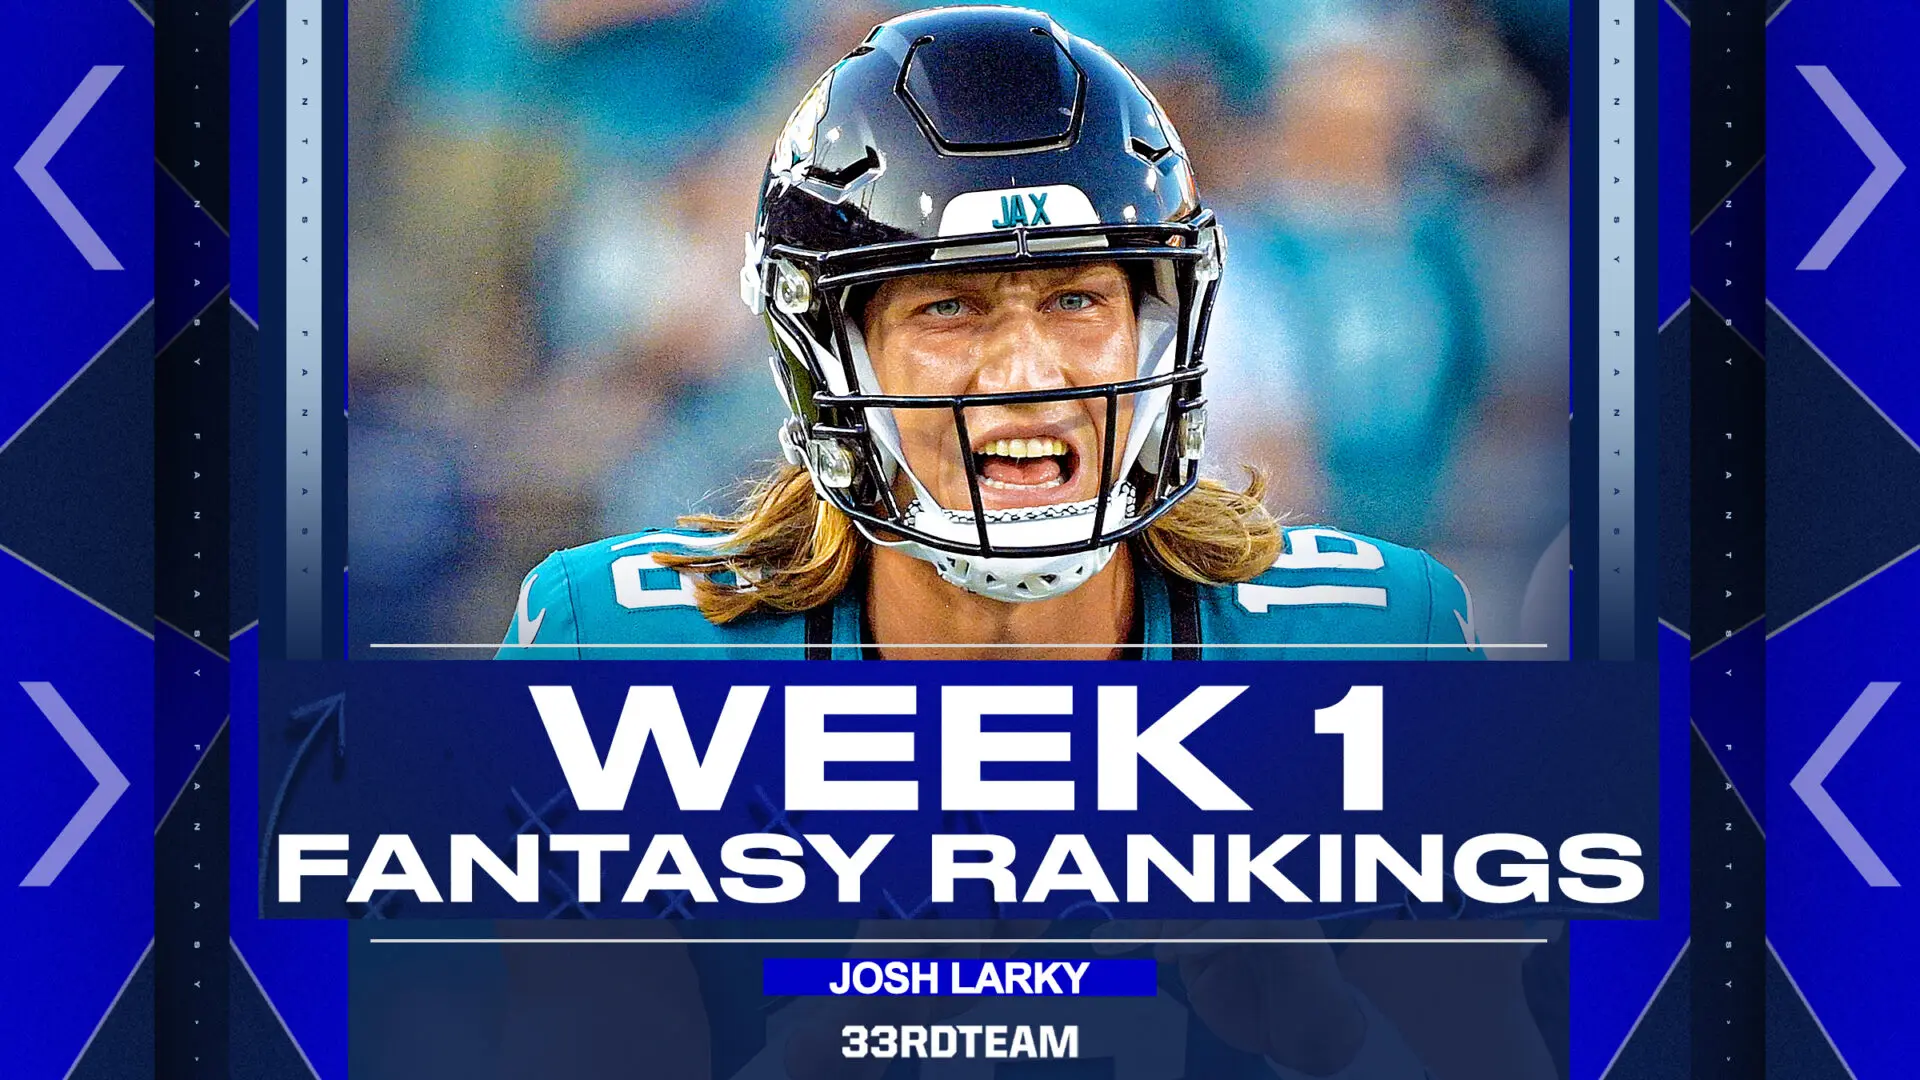 Expert picks at the flex position for week 1